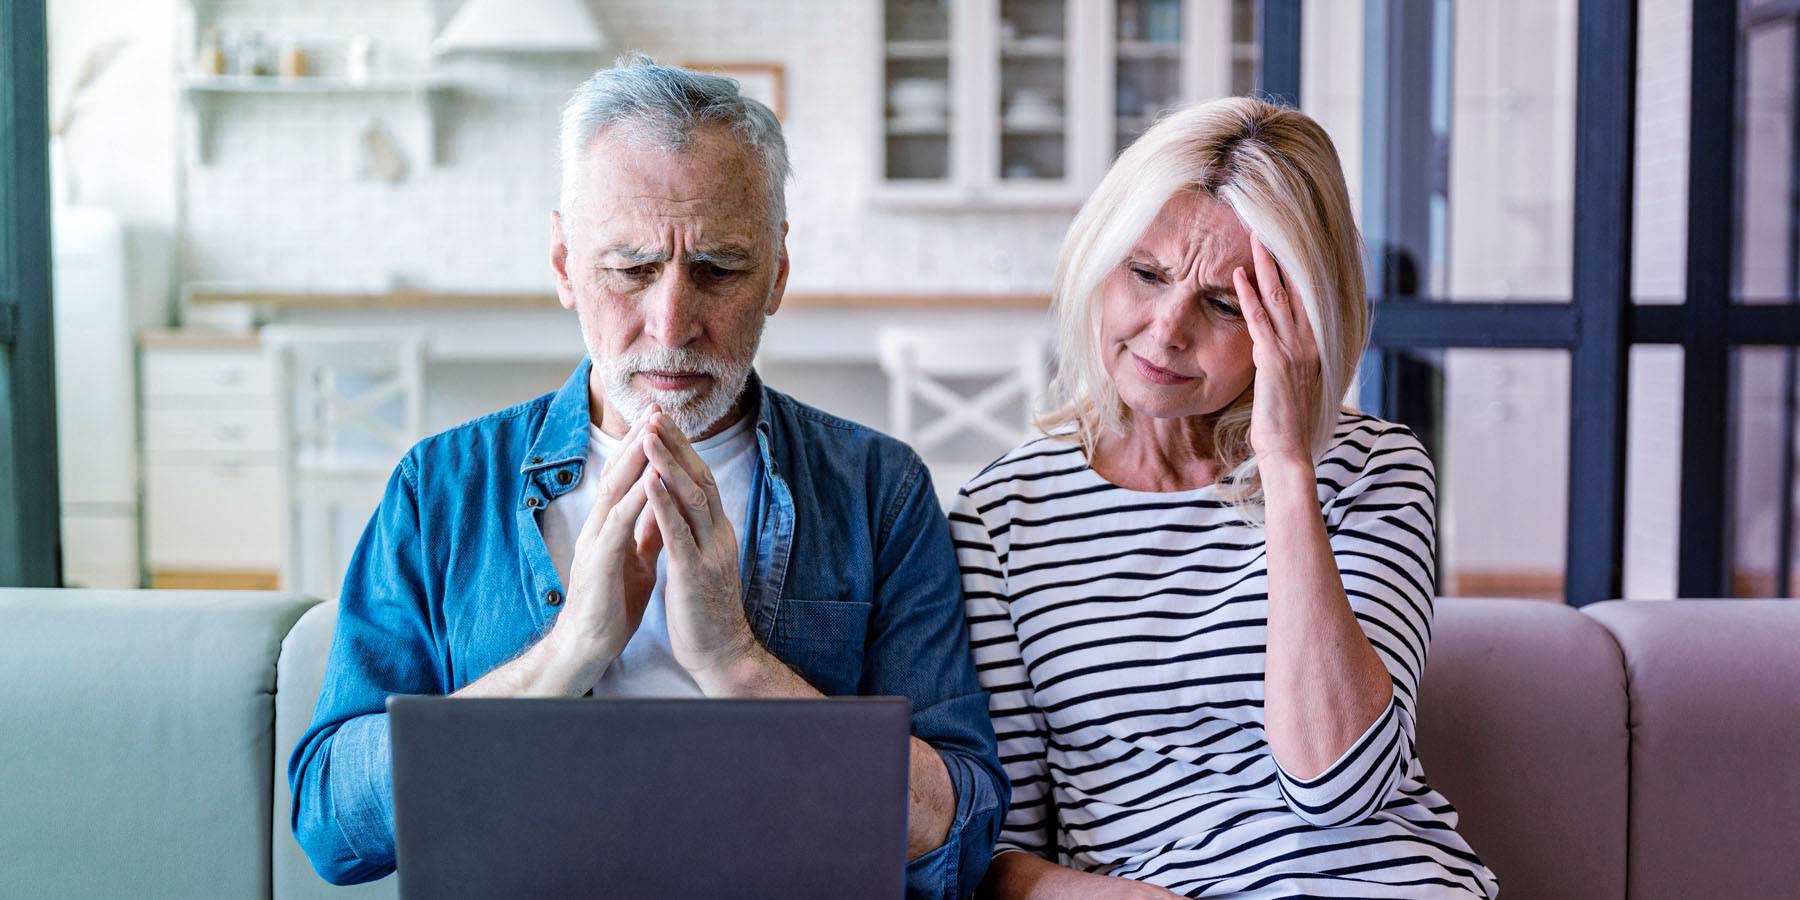 The Top 5 Mistakes Investors Make When Approaching Retirement